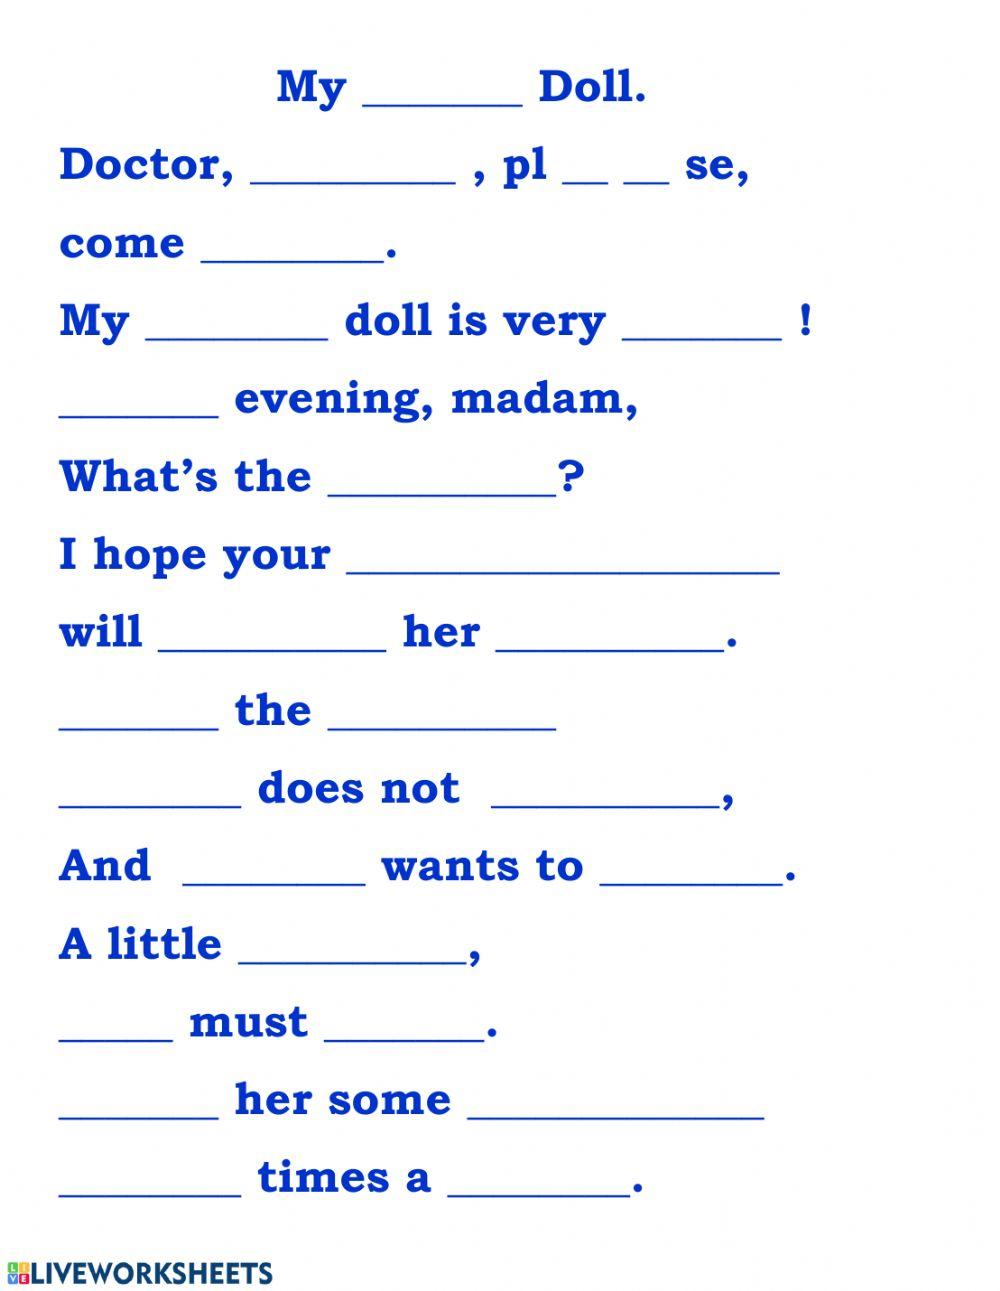 Poem MY SICK DOLL (write in the missing words)